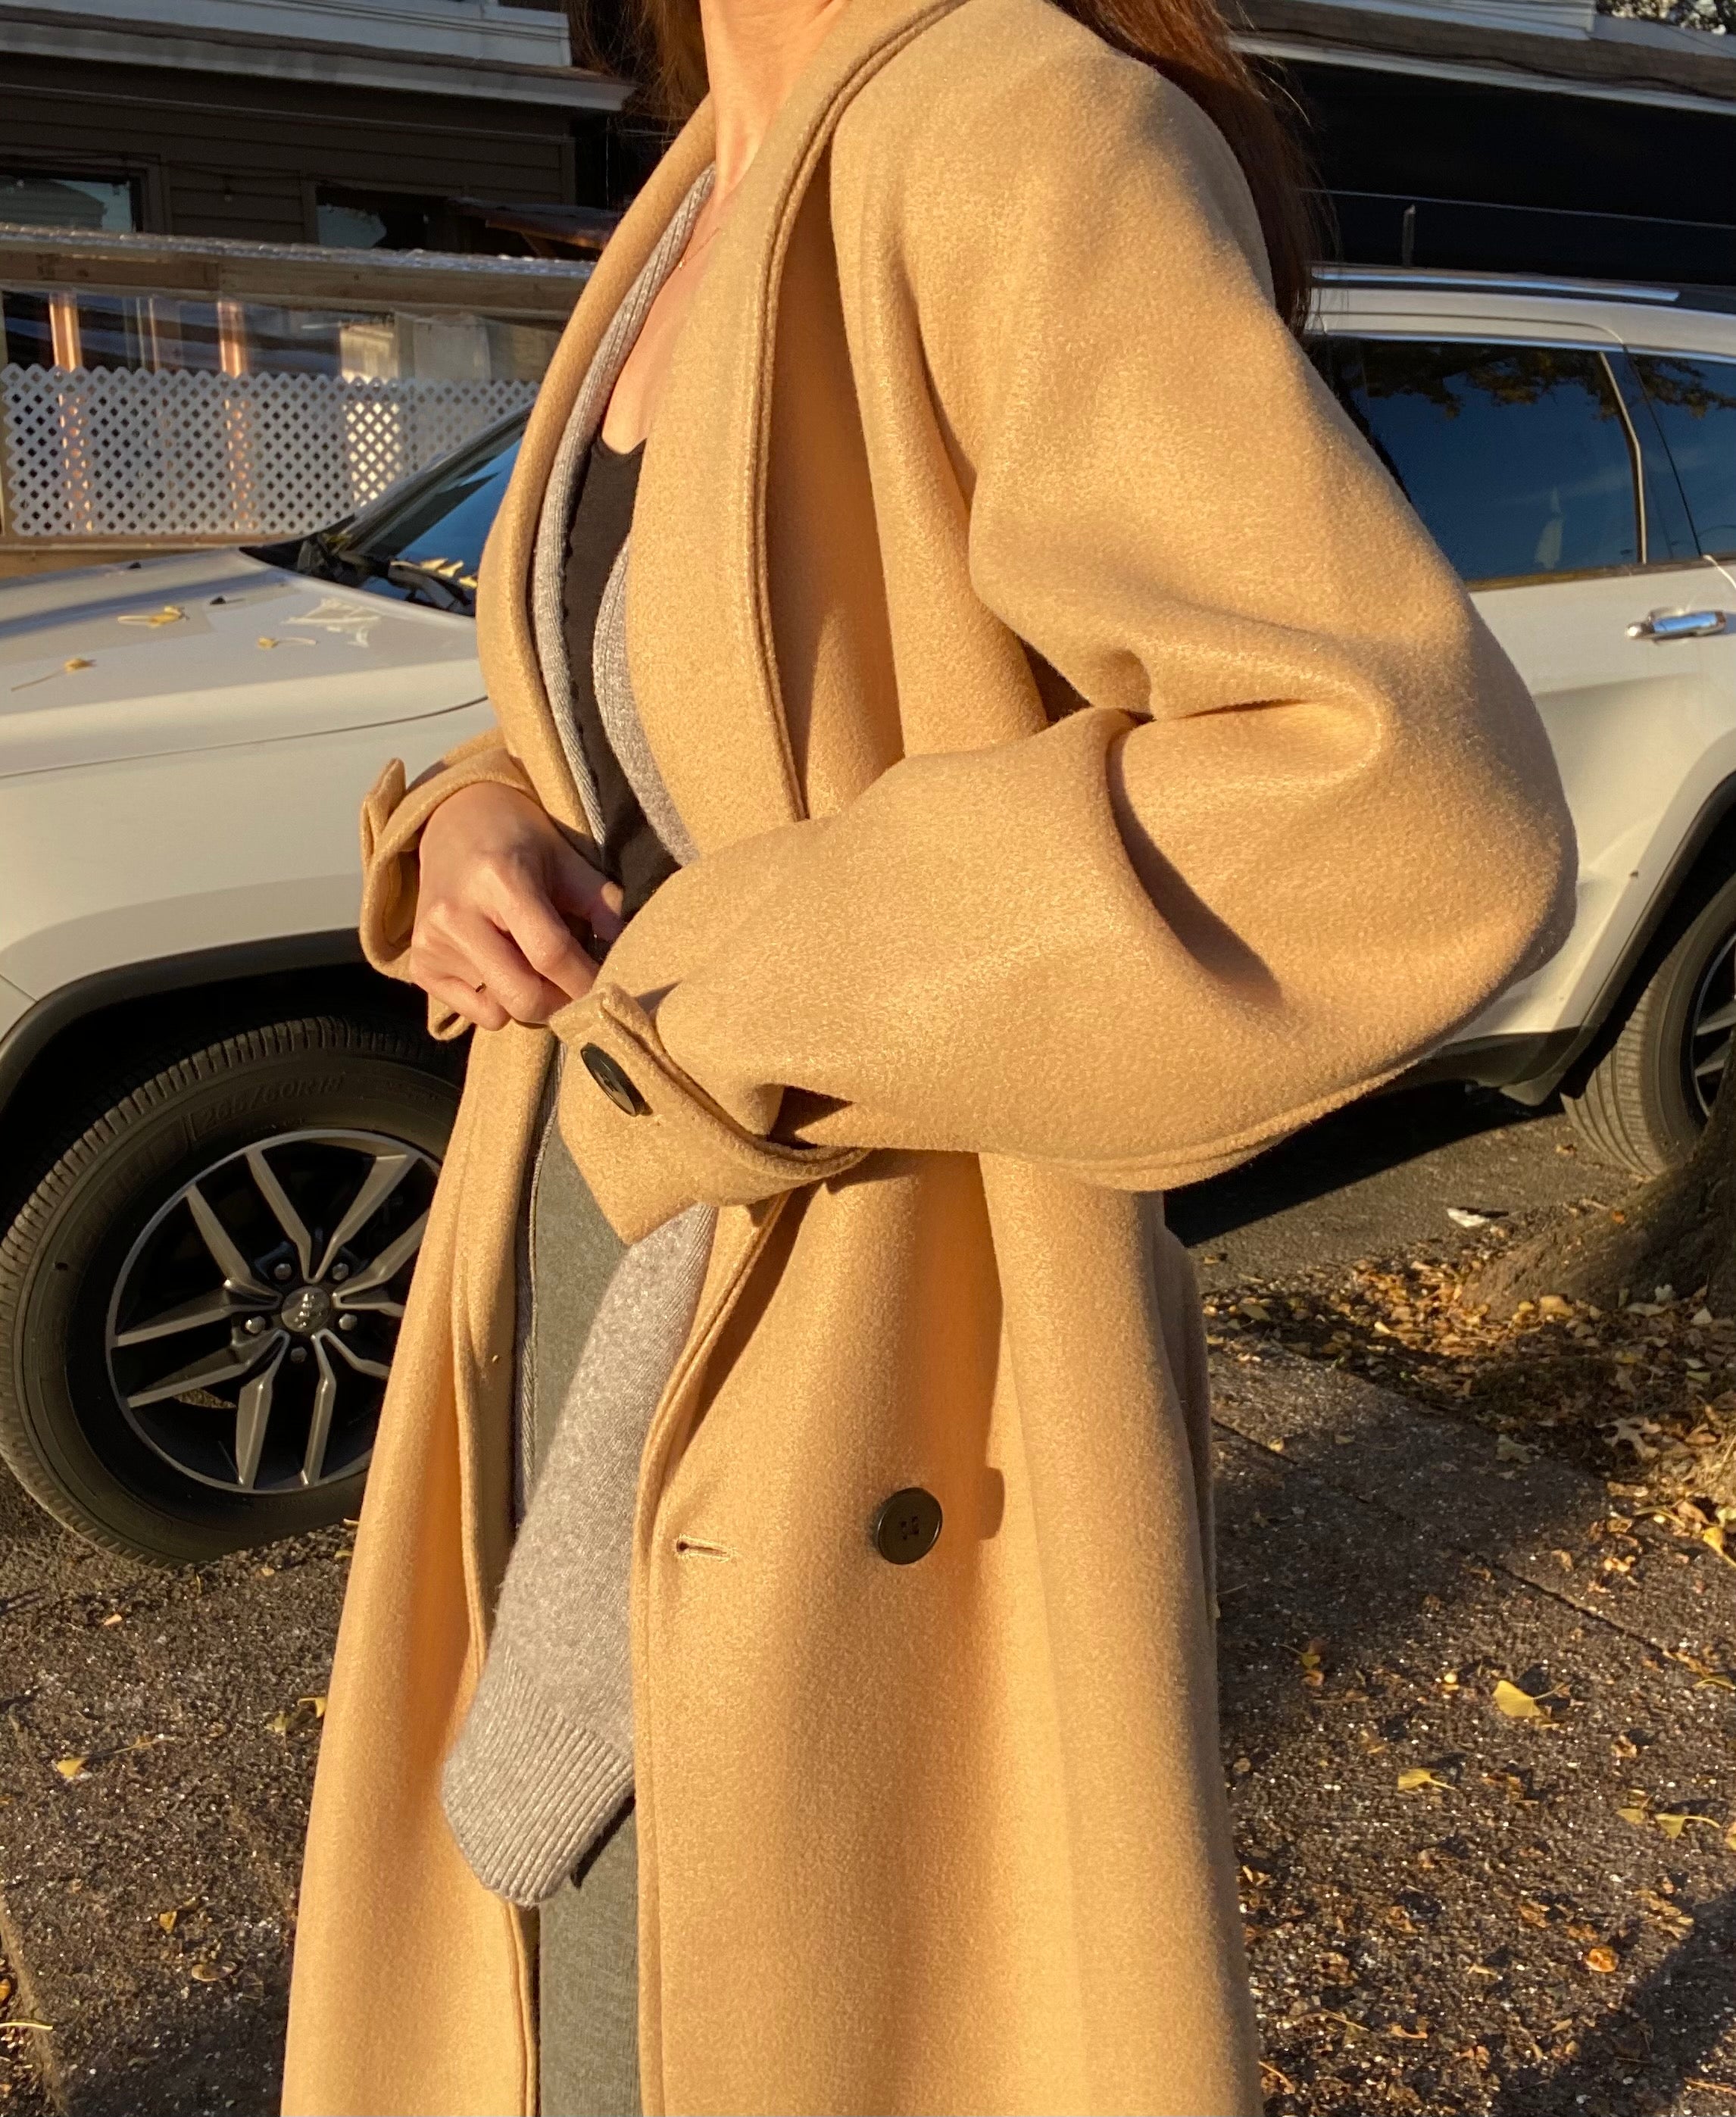 [Korean Style] Liana Double Breasted Long Wool Coat with Belt